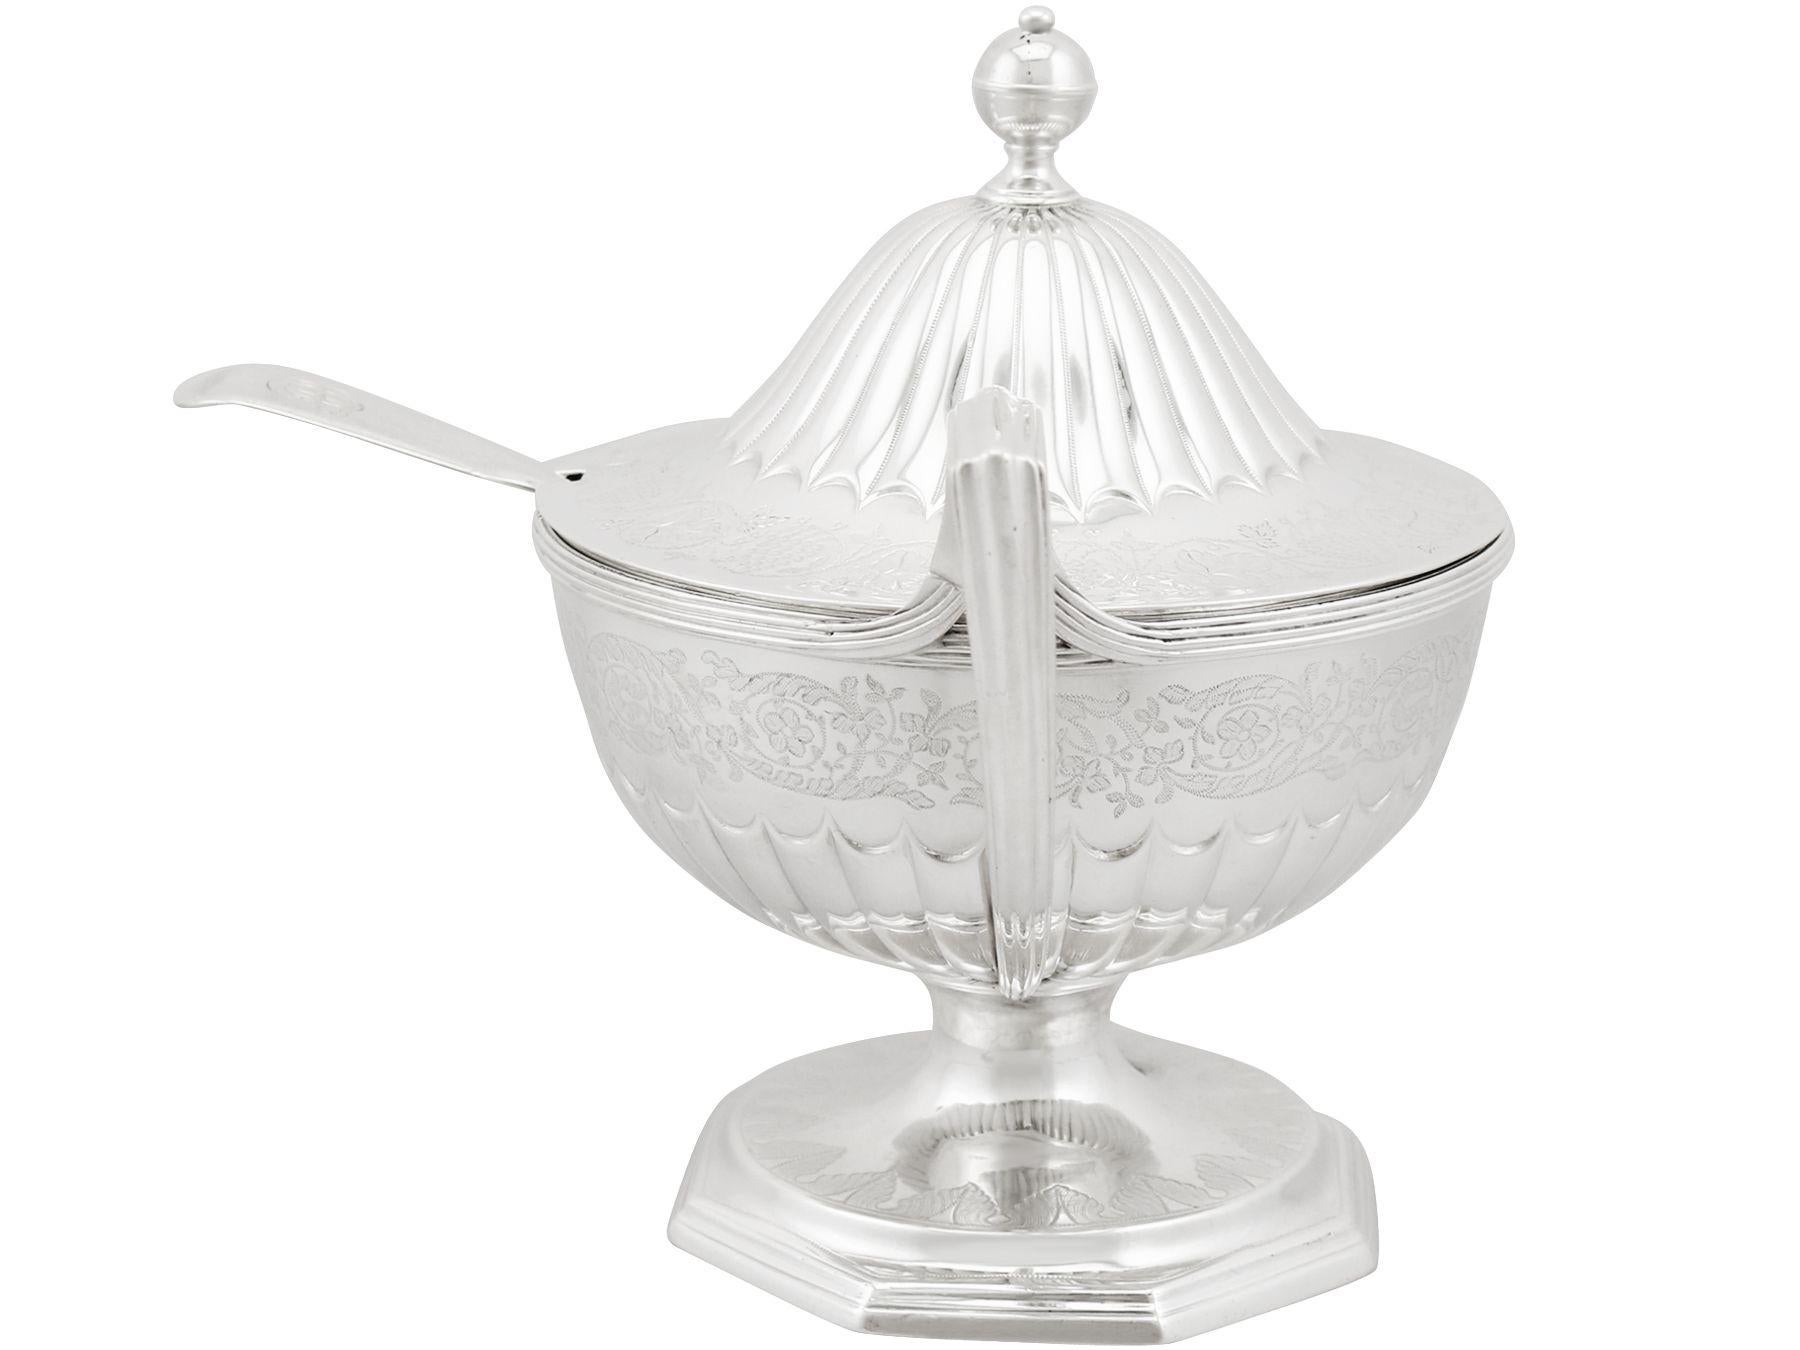 English Antique Sterling Silver Sauce Tureens